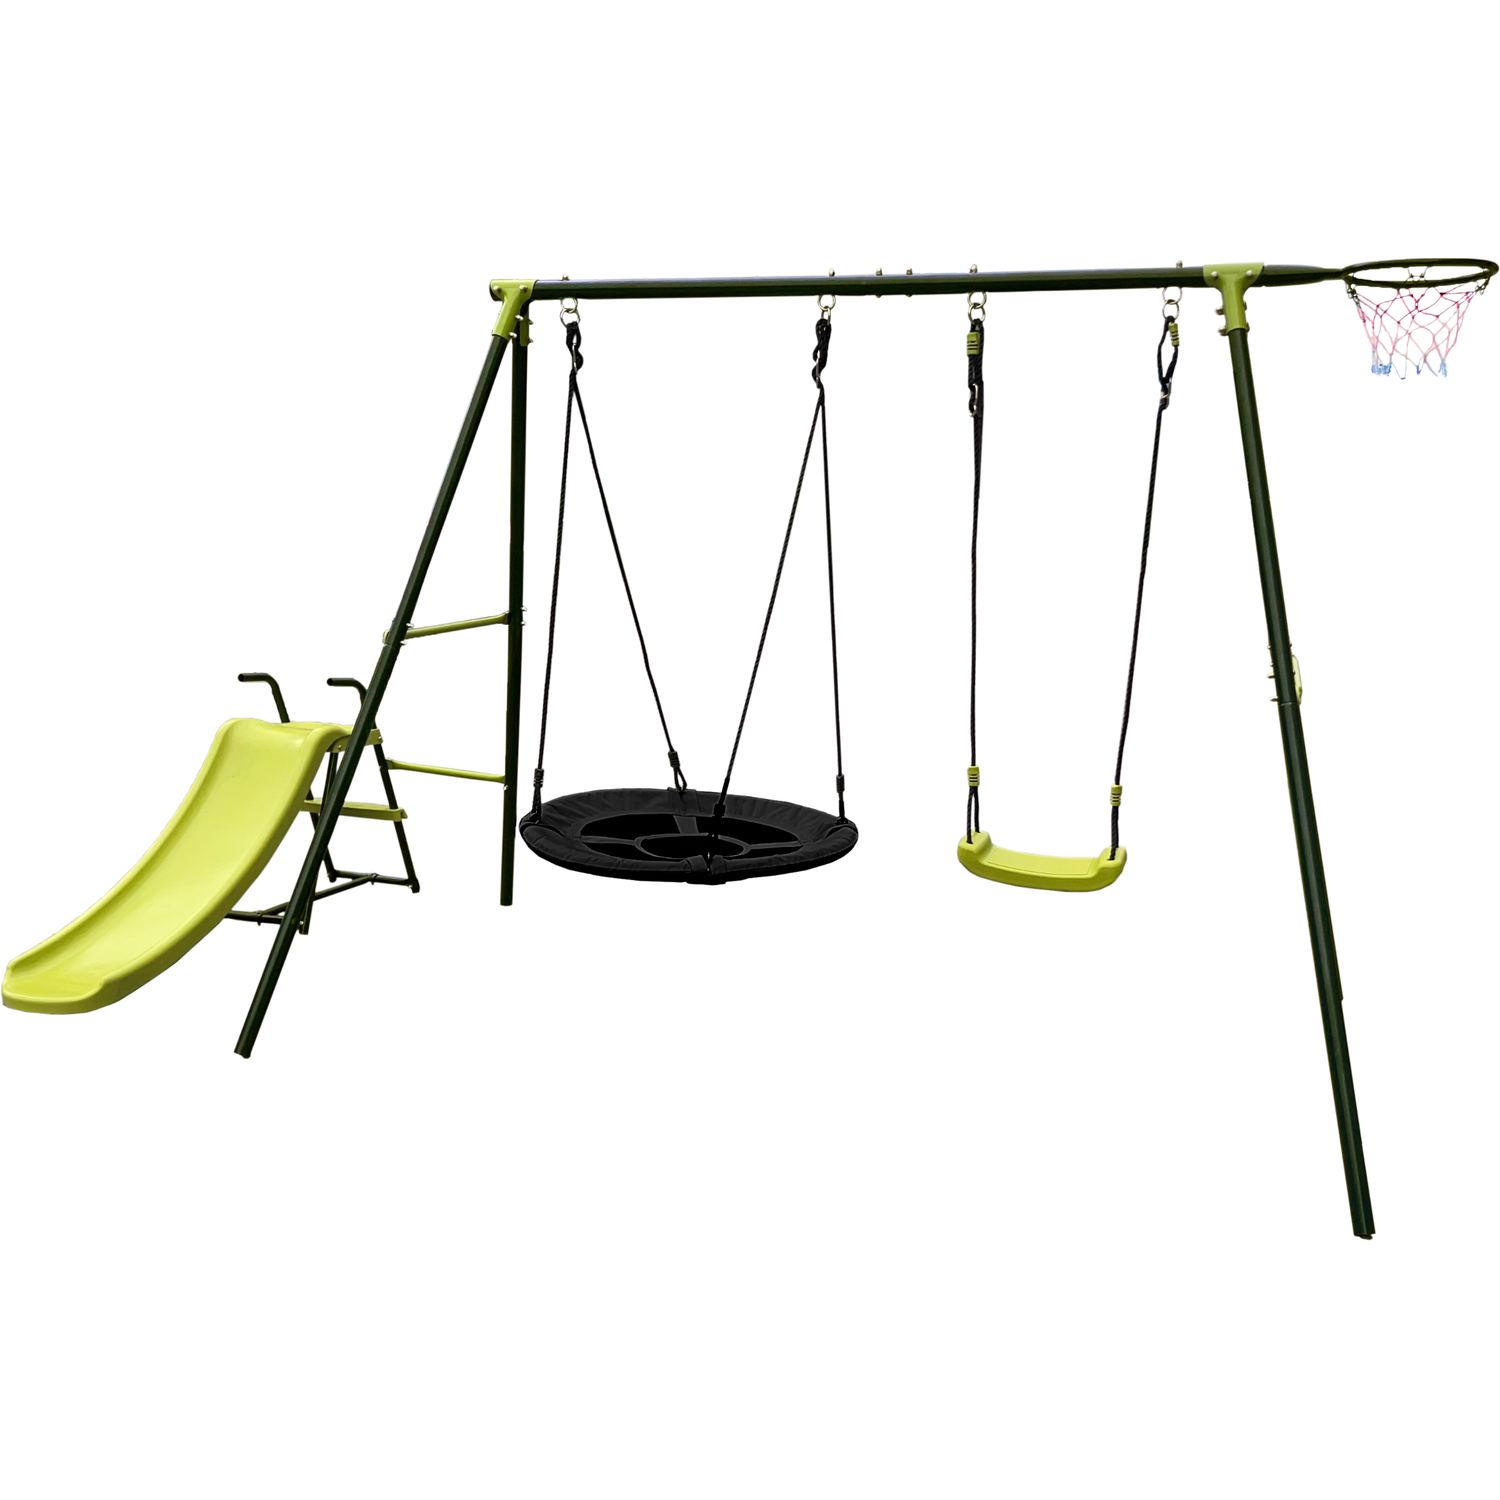 Double Swing with Slide Playset - Green Image